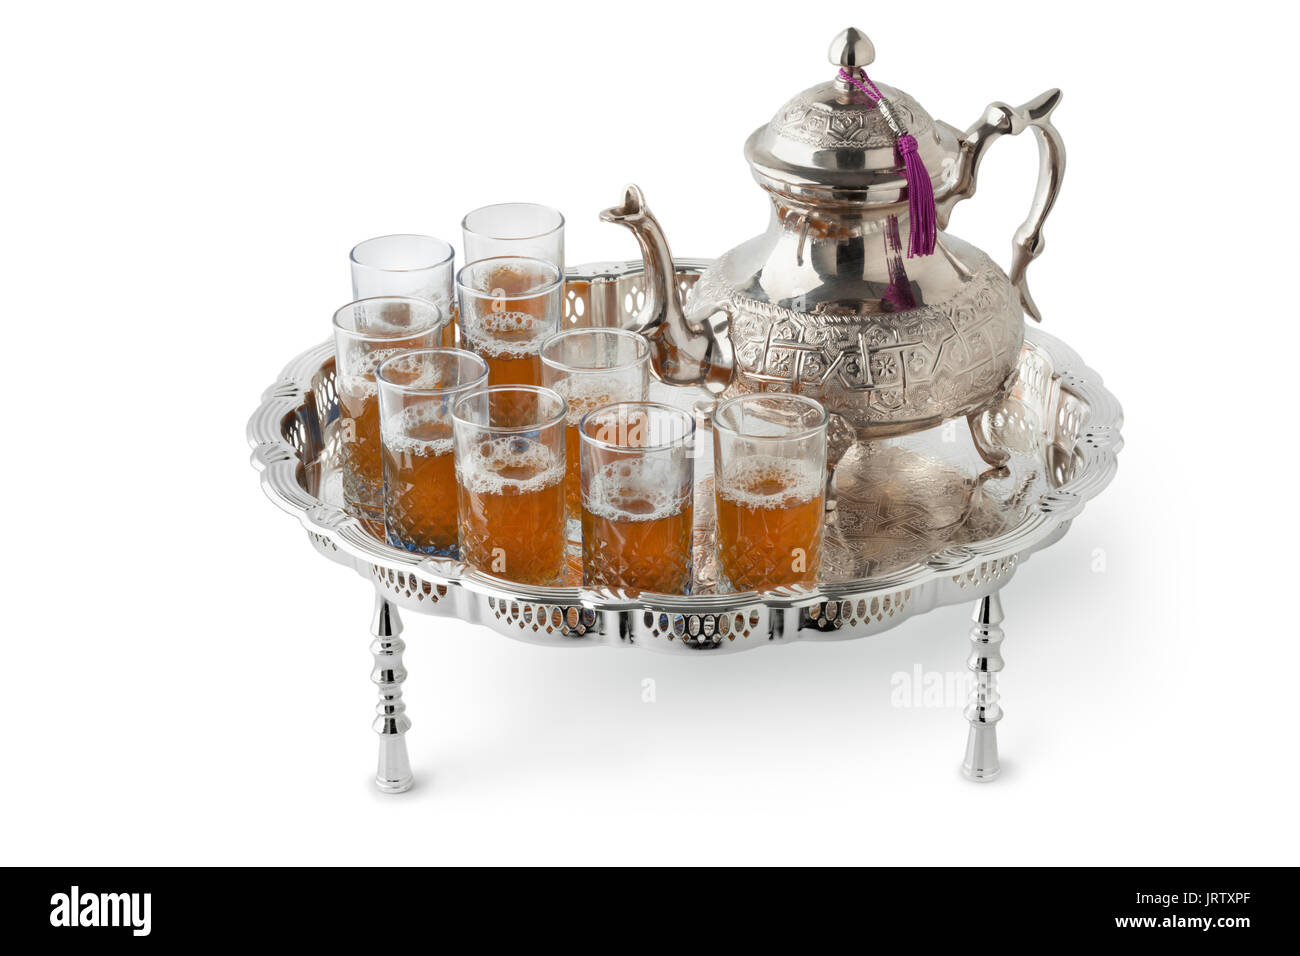 Traditional festive Moroccan silver tea set and glasses on white background  Stock Photo - Alamy